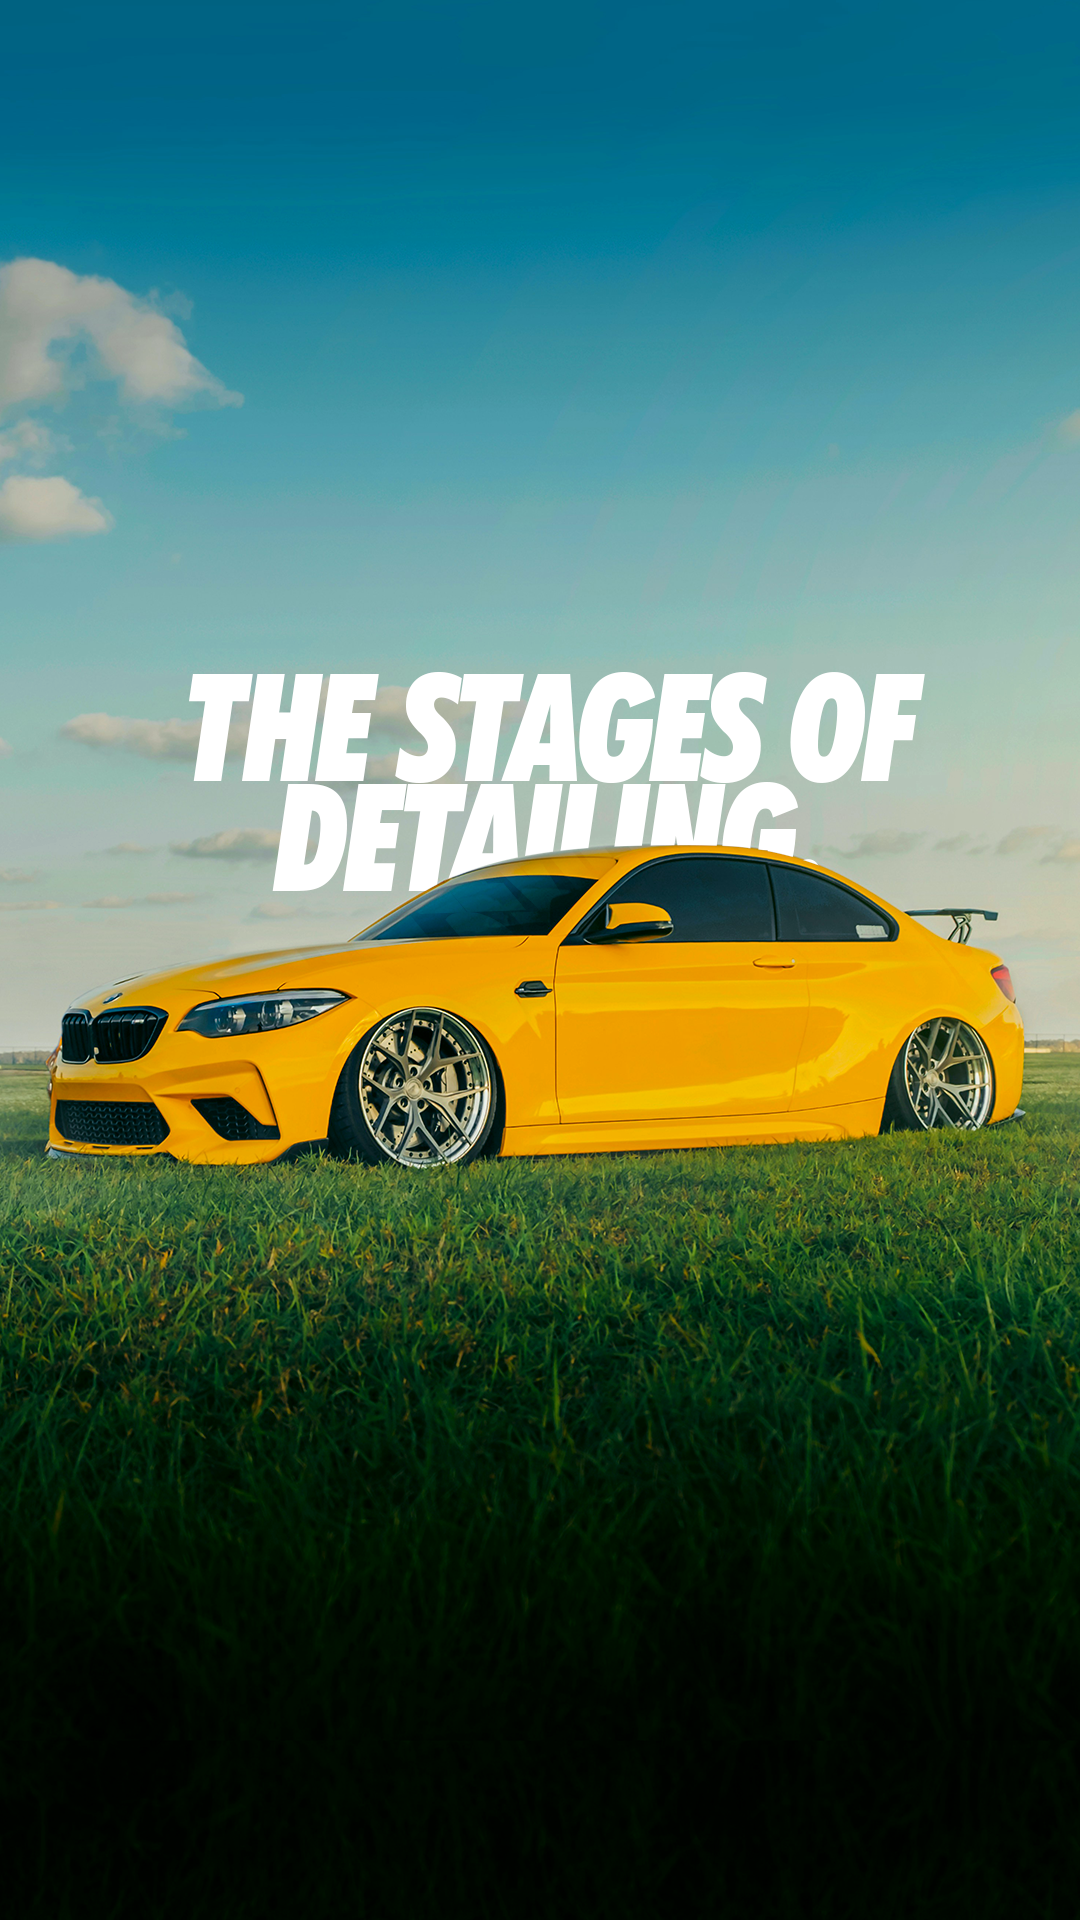 STAGES-OF-DETAILING1-MOBILE.png